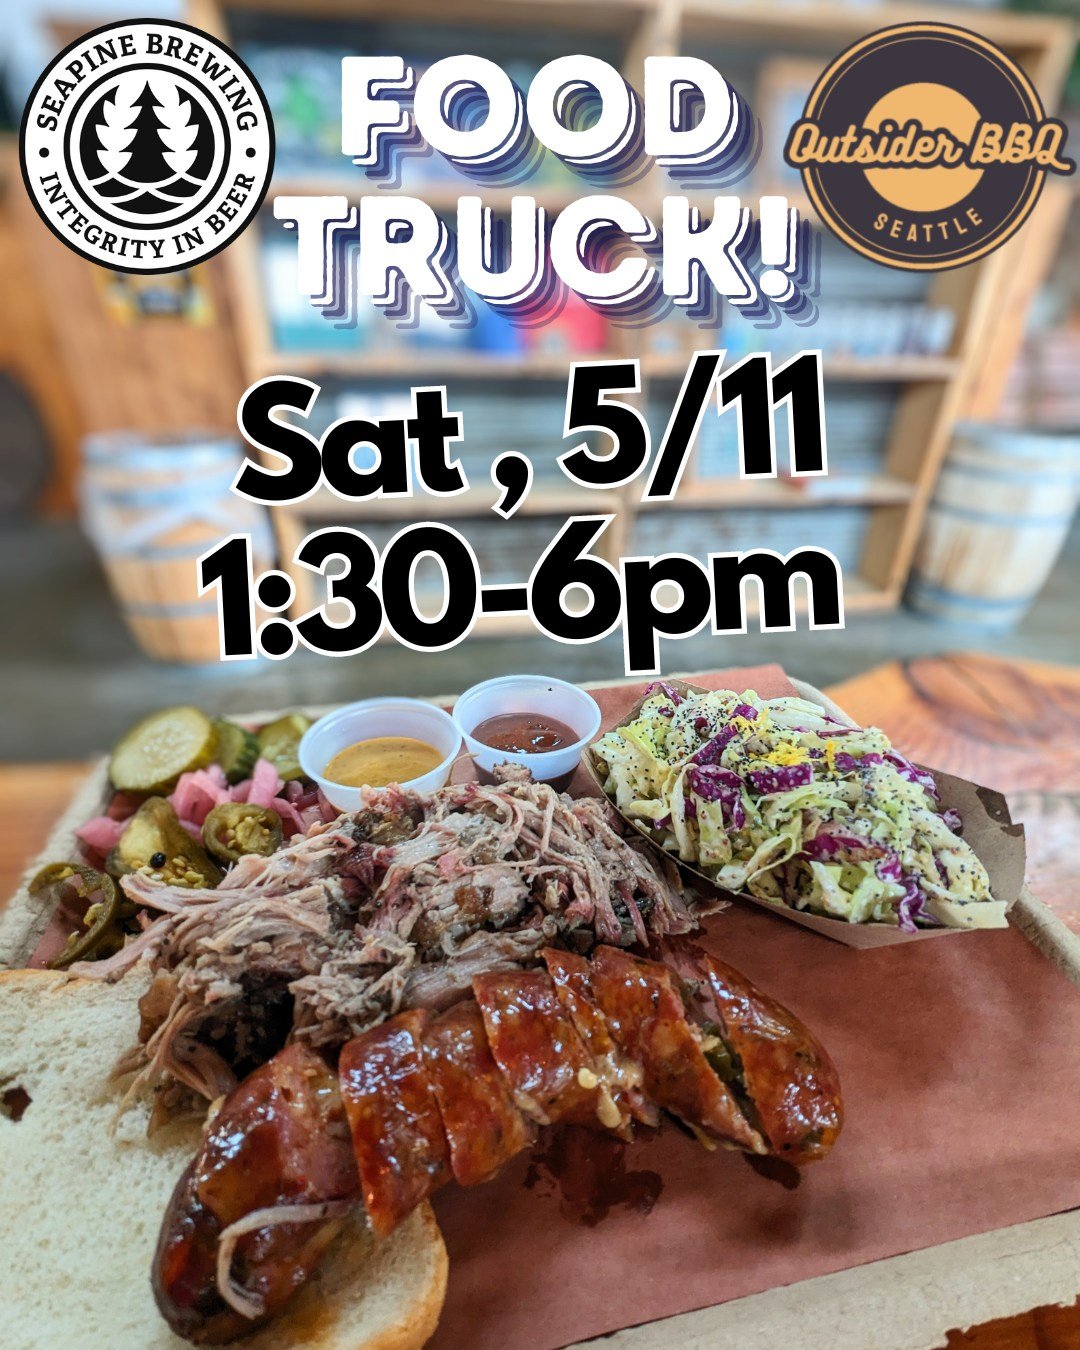 🚨Food truck this Saturday!🚨
Outsider BBQ will be serving up delicious barbeque at Seapine from 1:30-6pm on Saturday (5/11)! 
@outsider_bbq #seattlefoodtruck #seattlefoodtrucks #seattlefood #seattlebreweries #seattlebeer